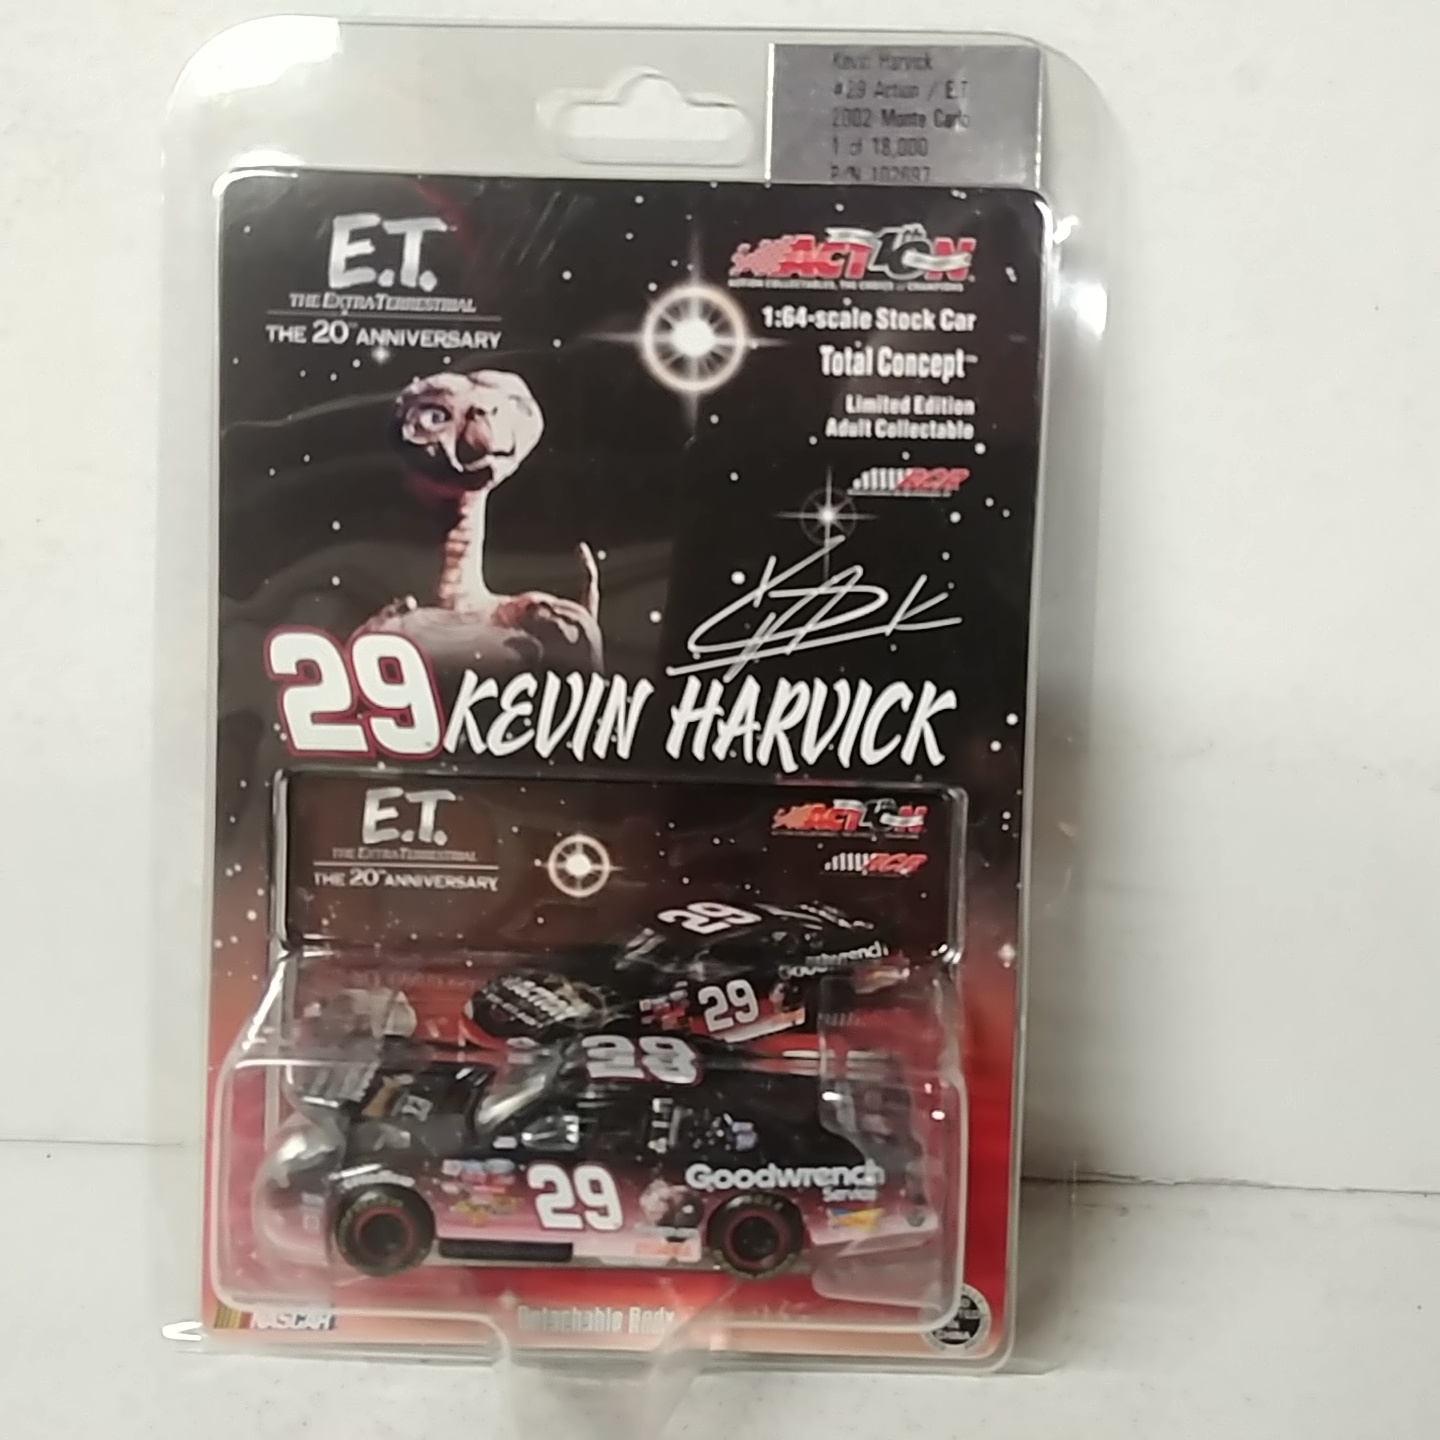 2002 Kevin Harvick 1/64th Action/Goodwrench "ET"" Busch Series" Total Concept hood open Monte Carlo